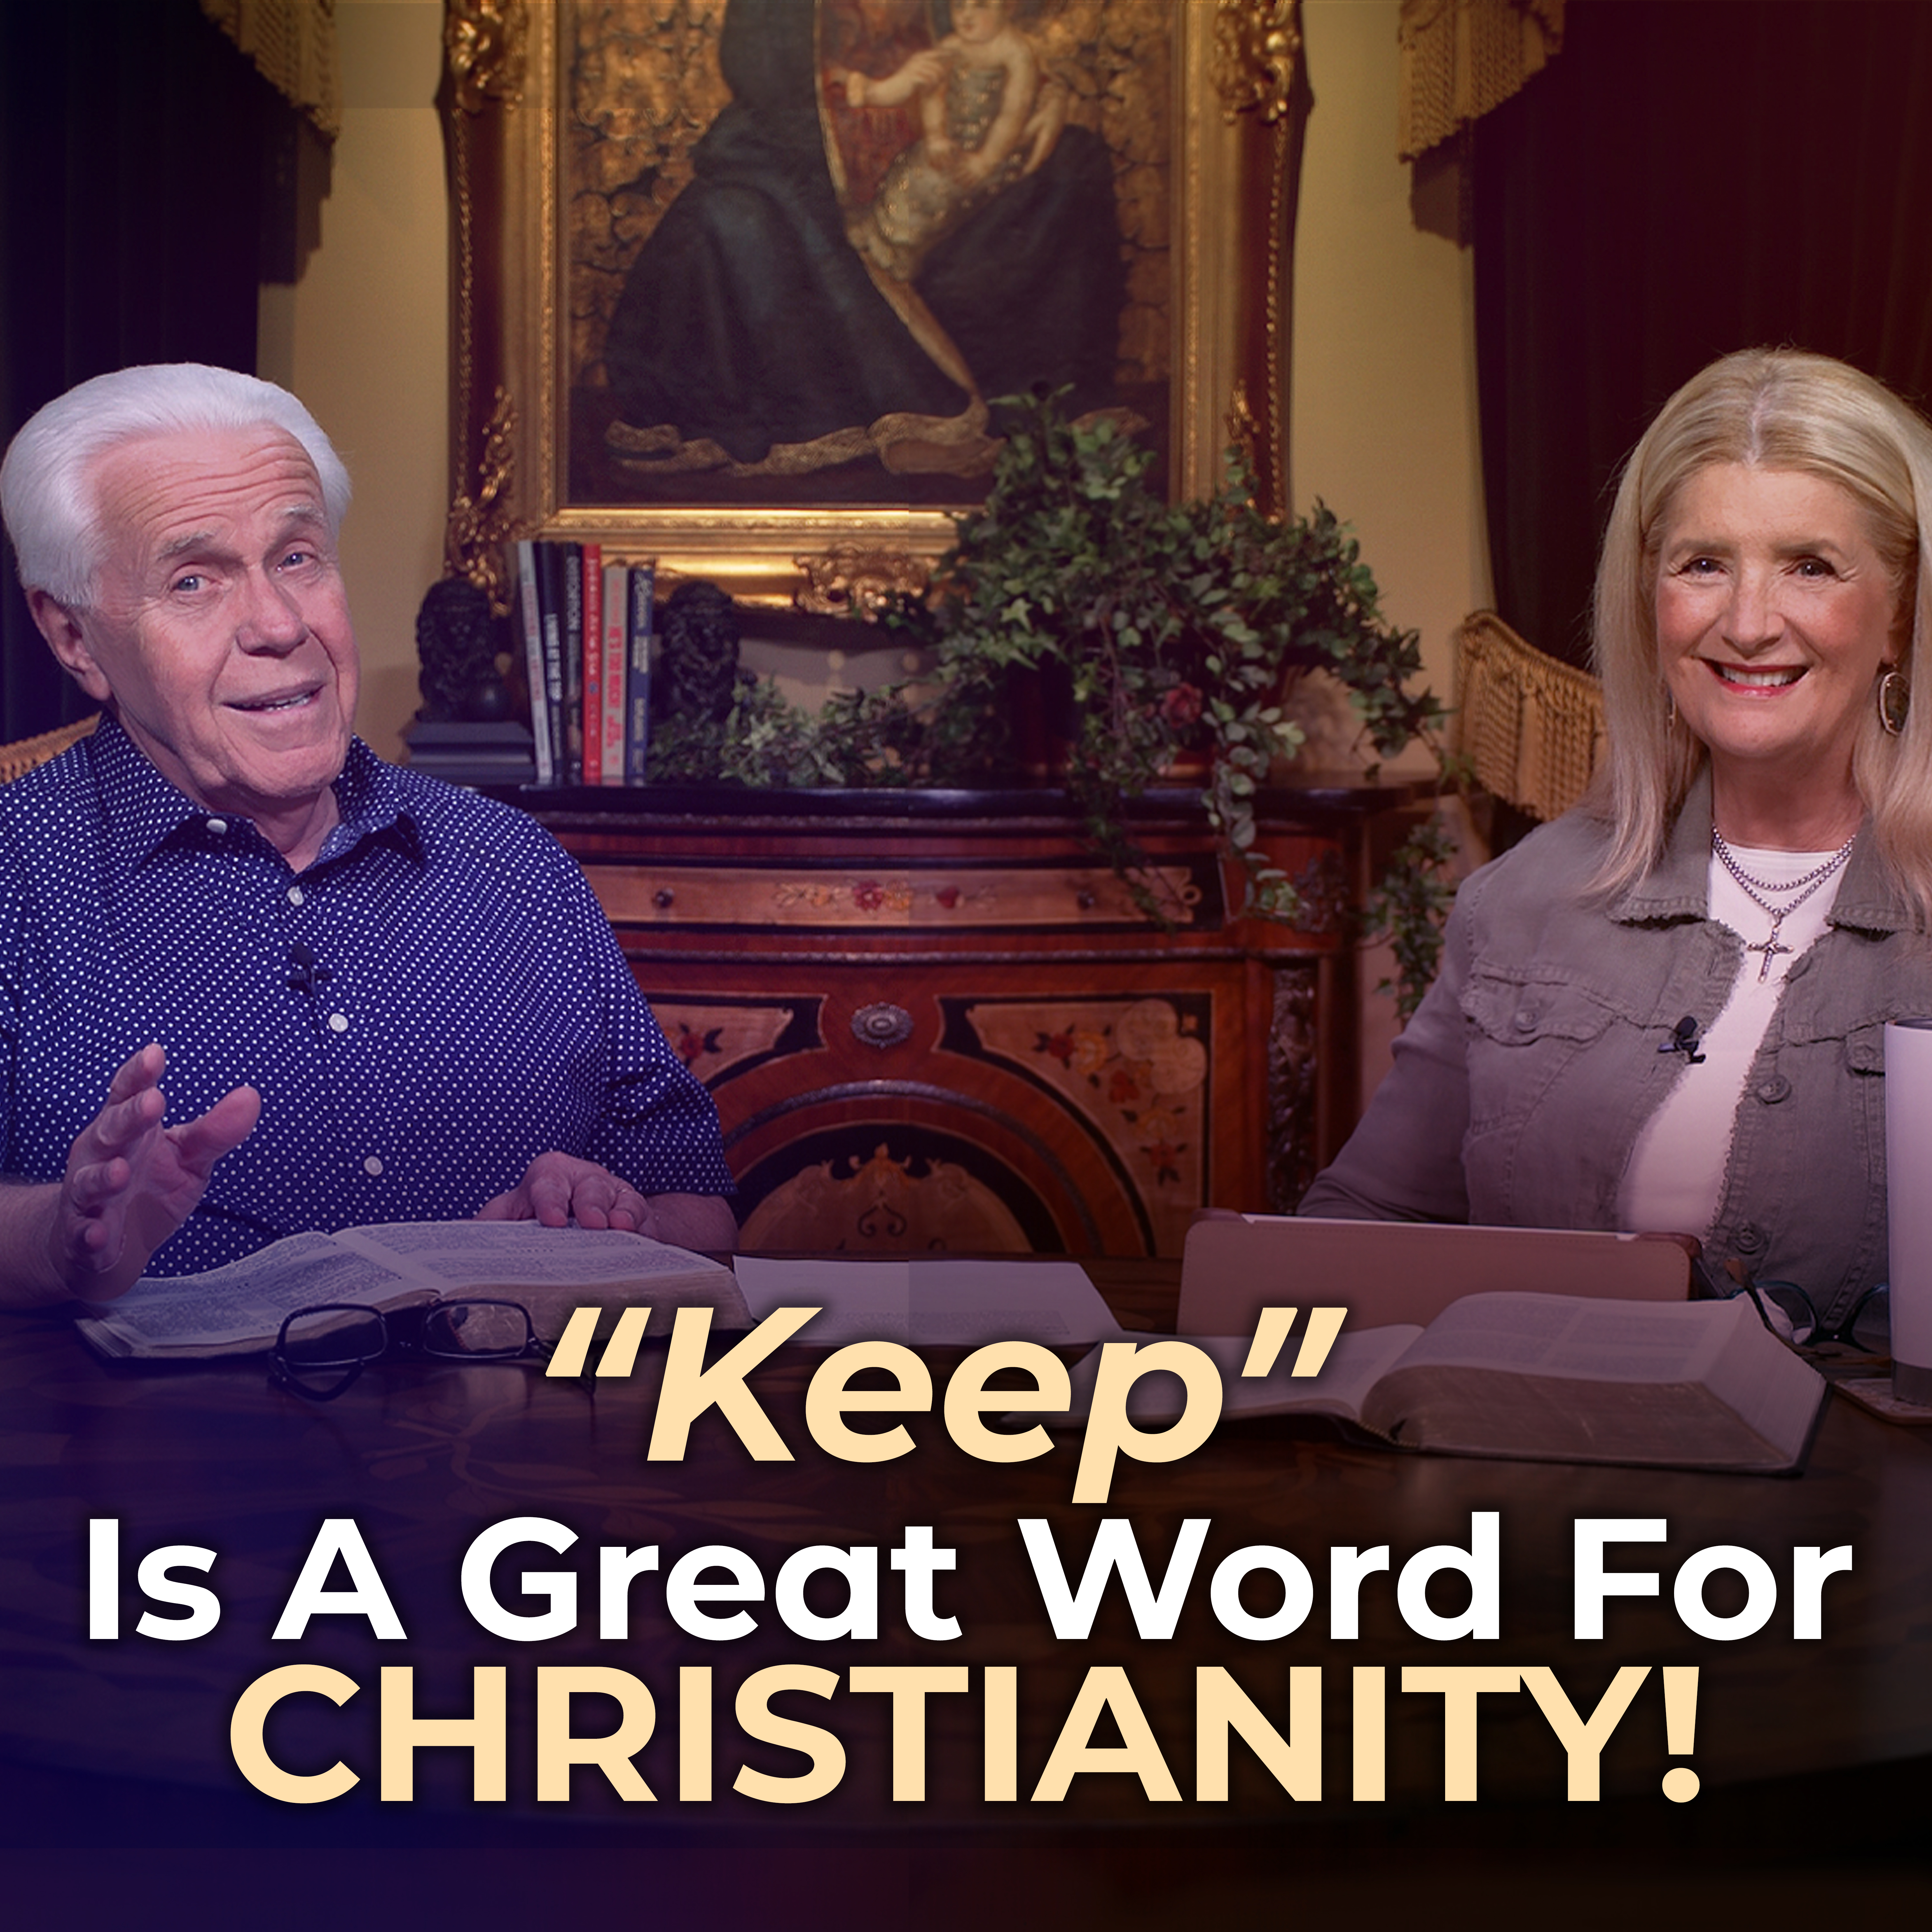 “Keep” Is A Great Word For Christianity!